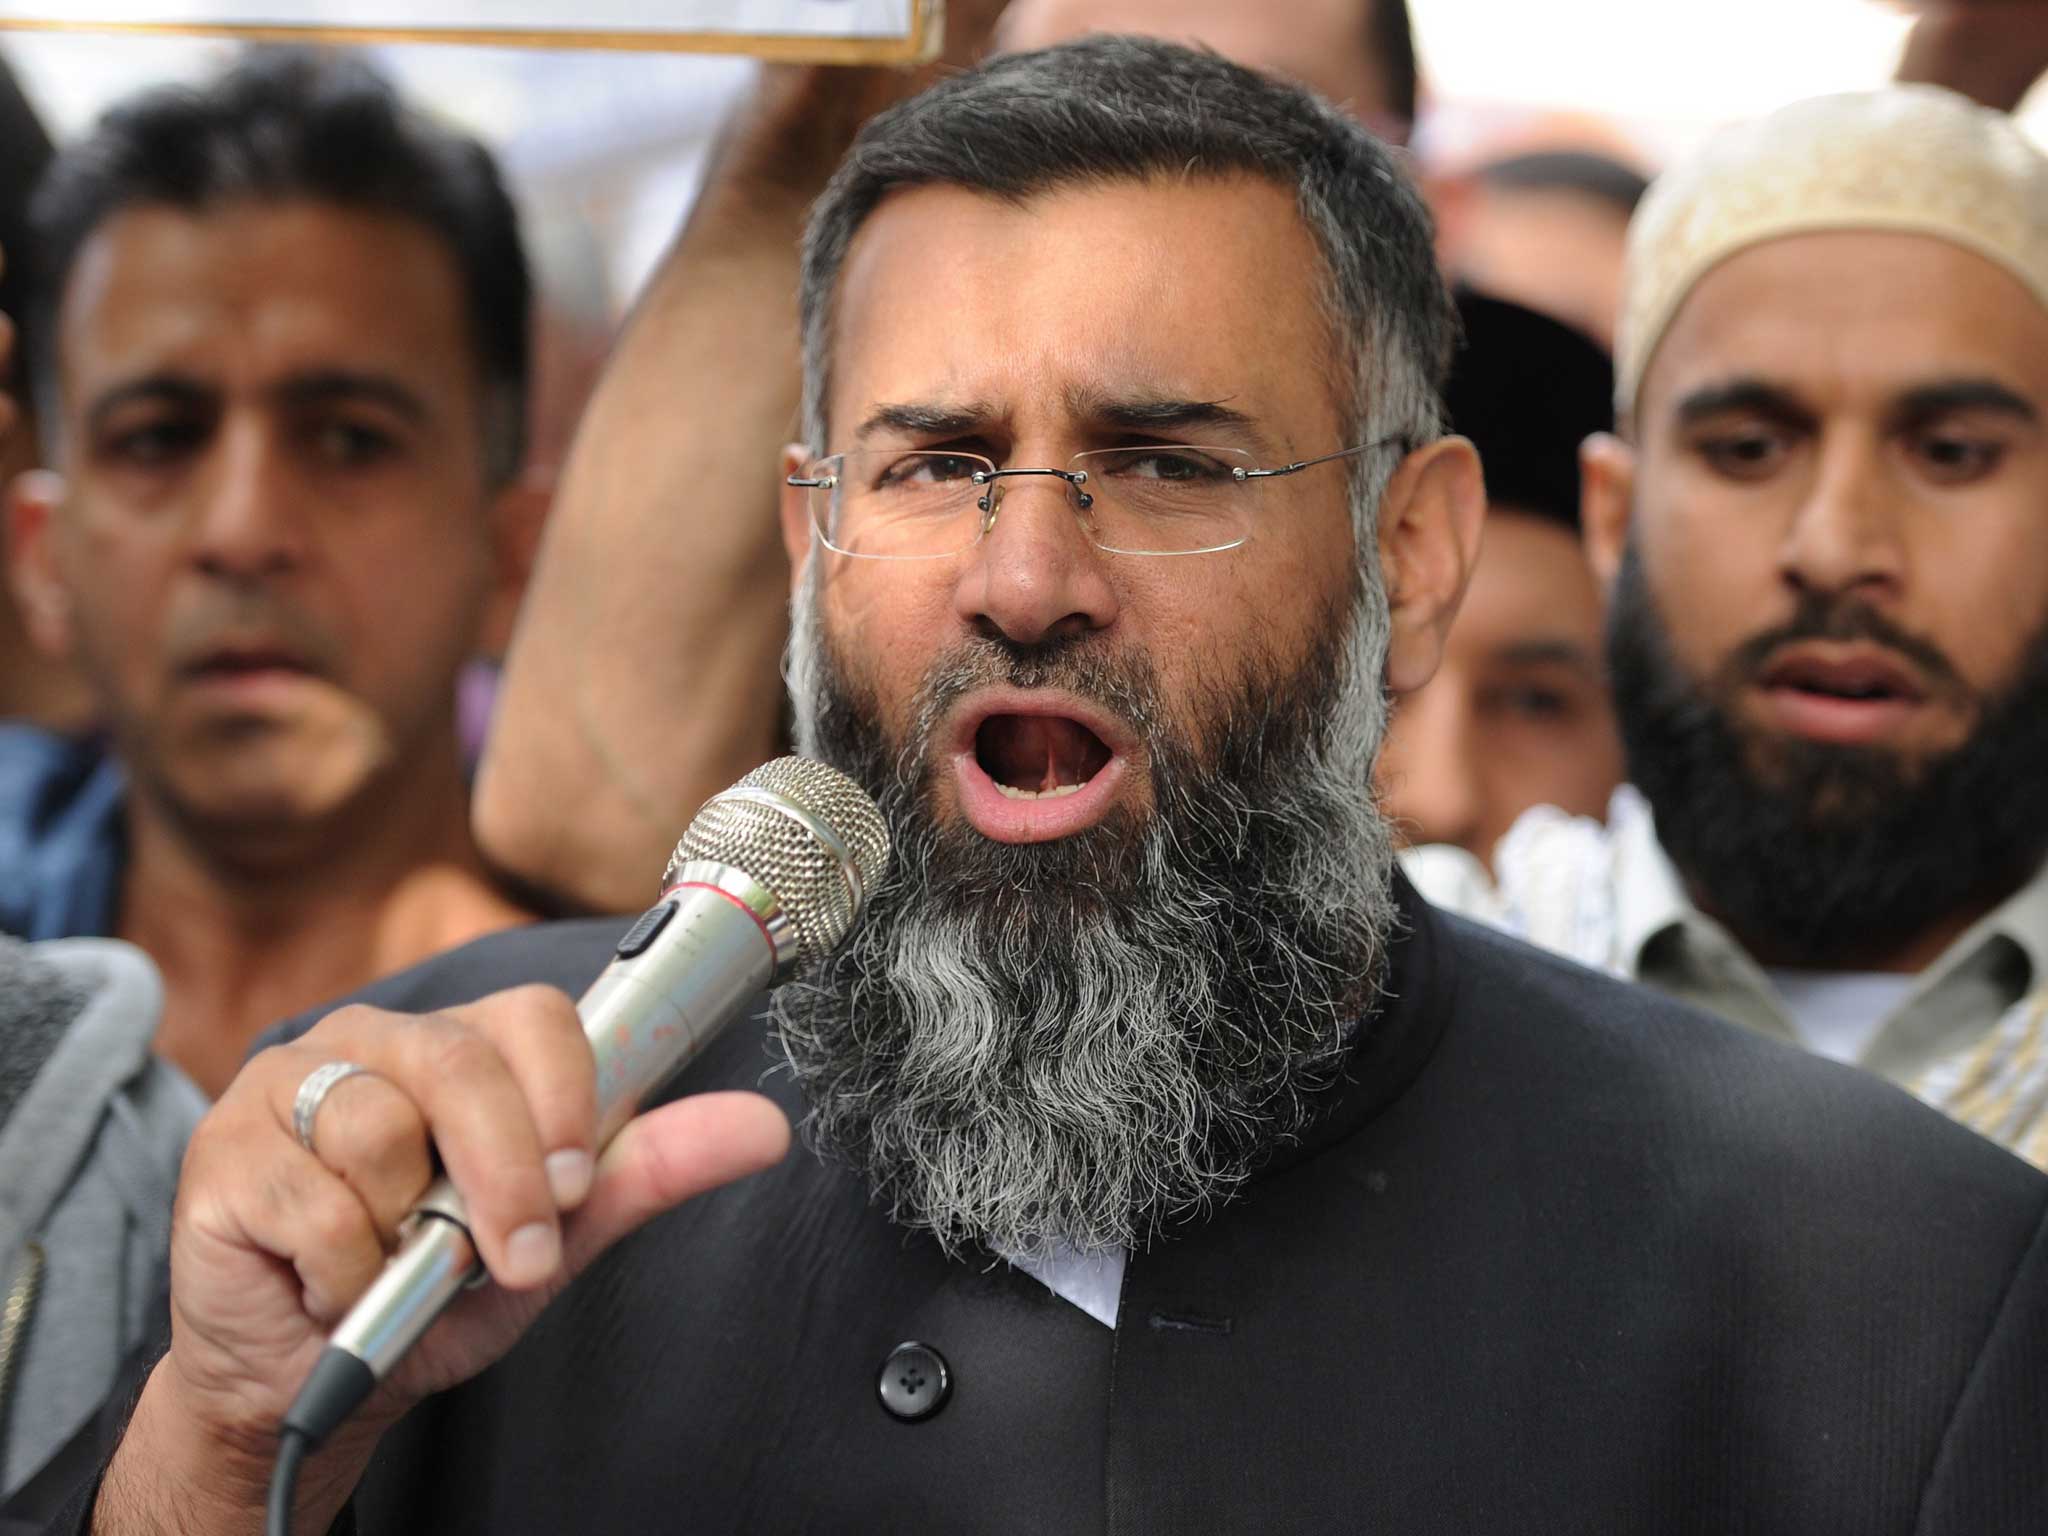 Radical preacher Anjem Choudary encouraged backing for Isis in a series of talks posted on YouTube